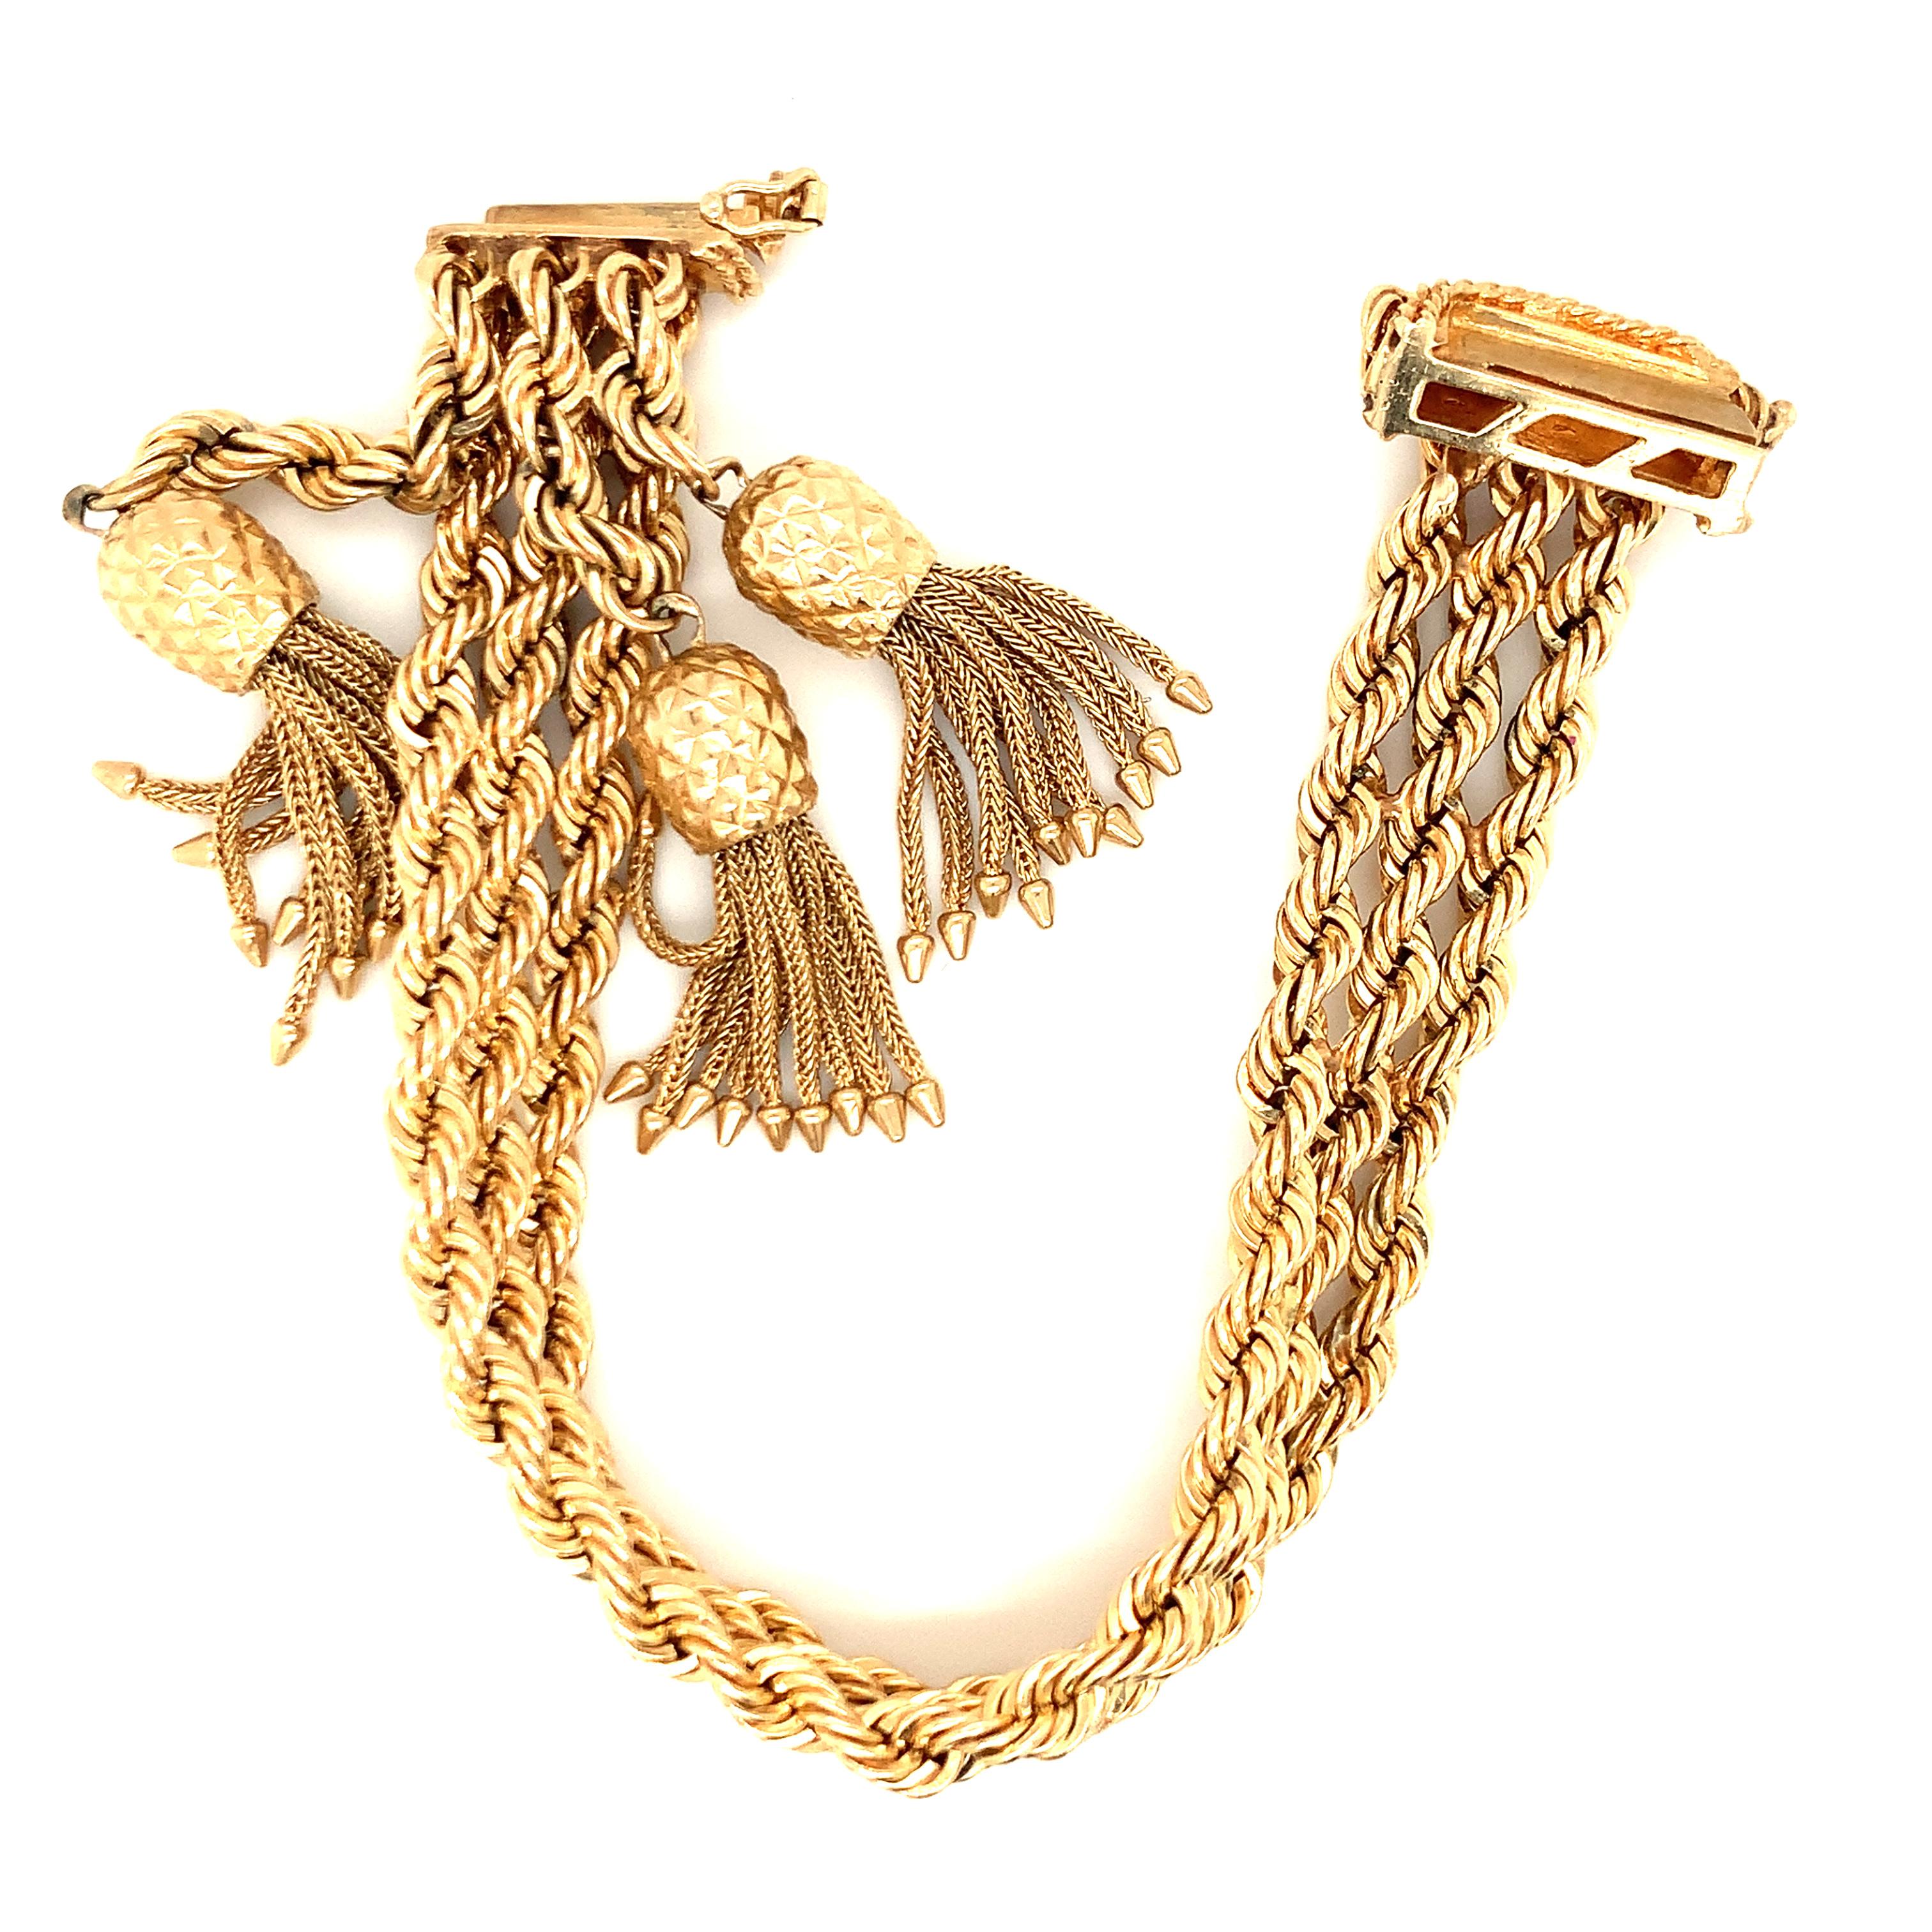 14K Yellow Gold Tassle Bracelet In Good Condition For Sale In Beverly Hills, CA